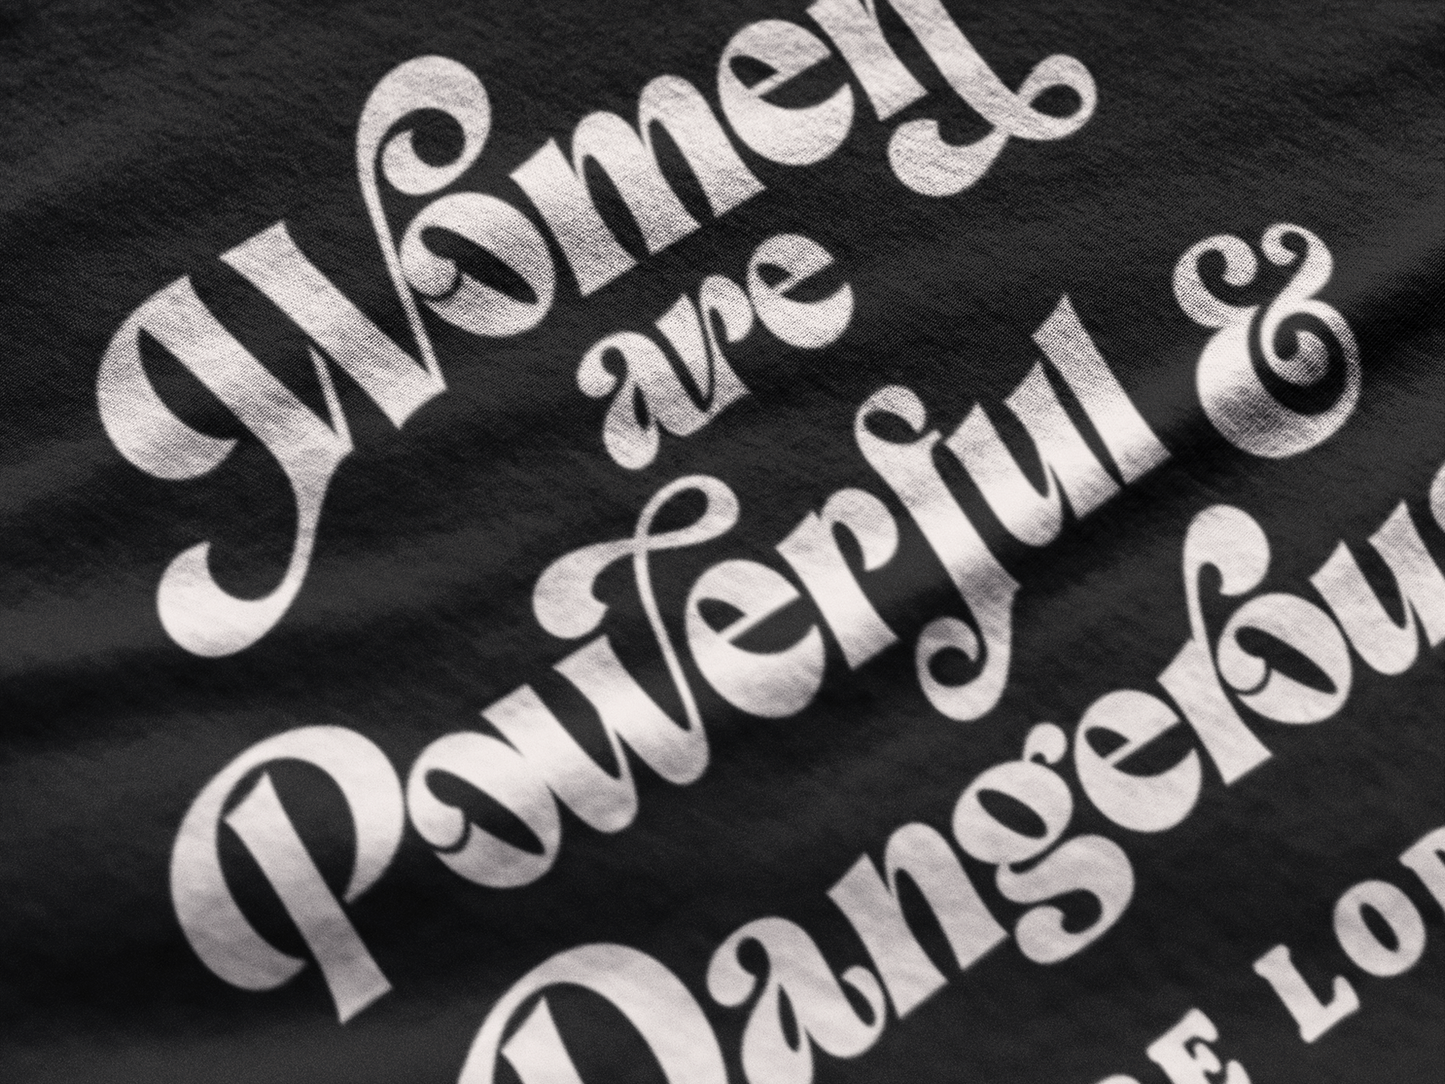 Women Are Powerful & Dangerous Audre Lorde Unisex t-shirt - Bad Perfectionist Co.